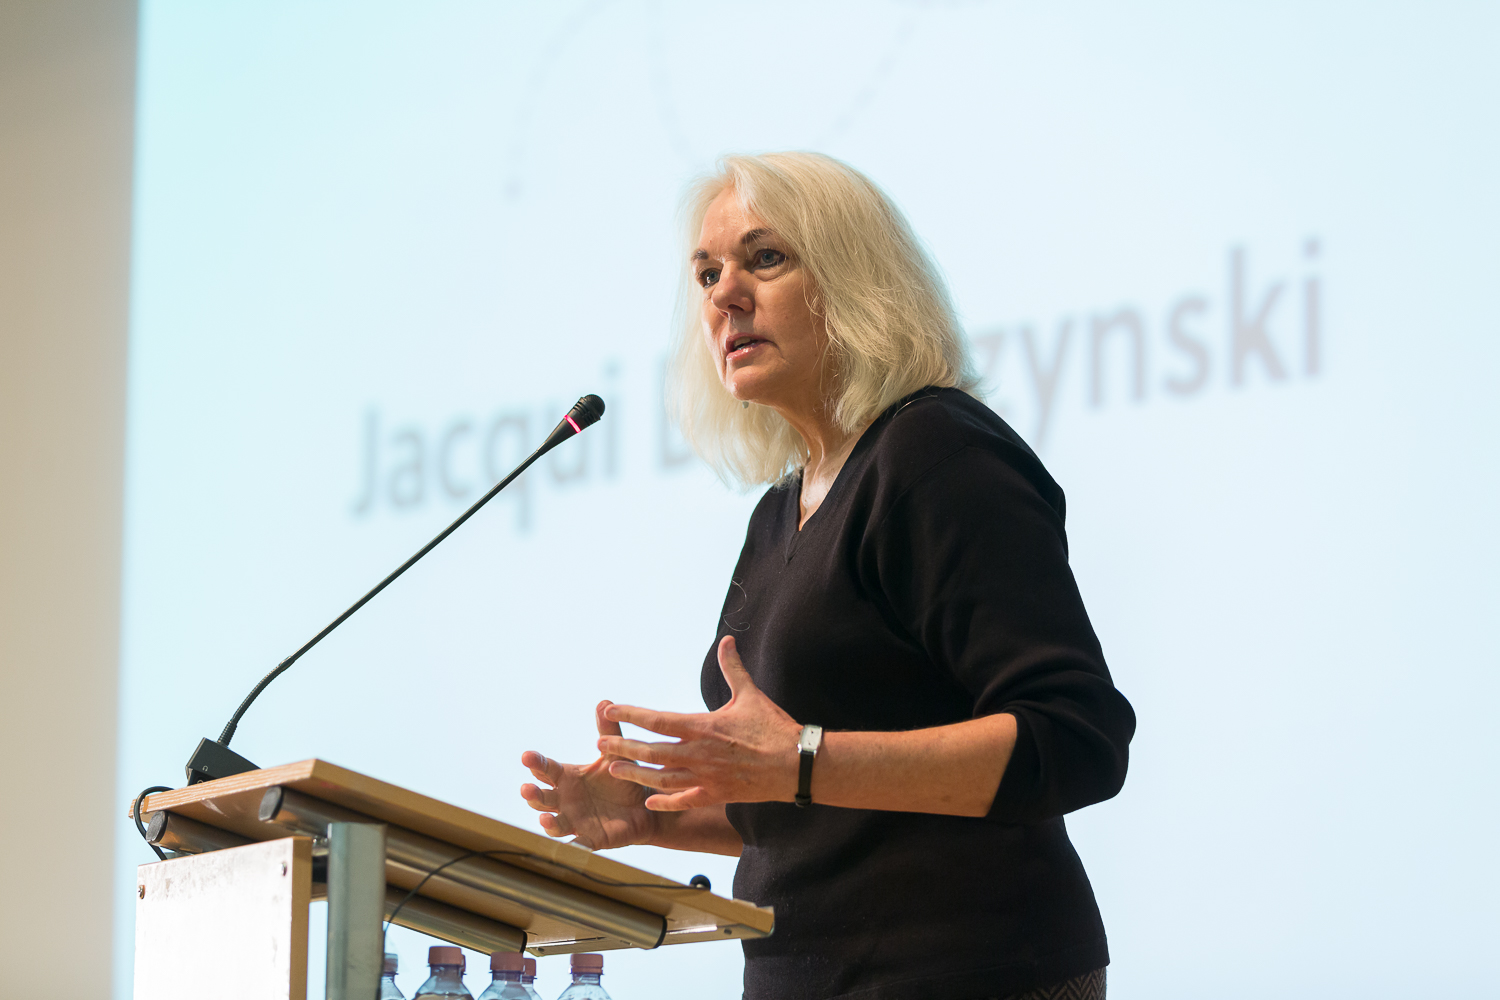 Jacqui Banaszynski at the The Power of Storytelling international conference in Bucharest.